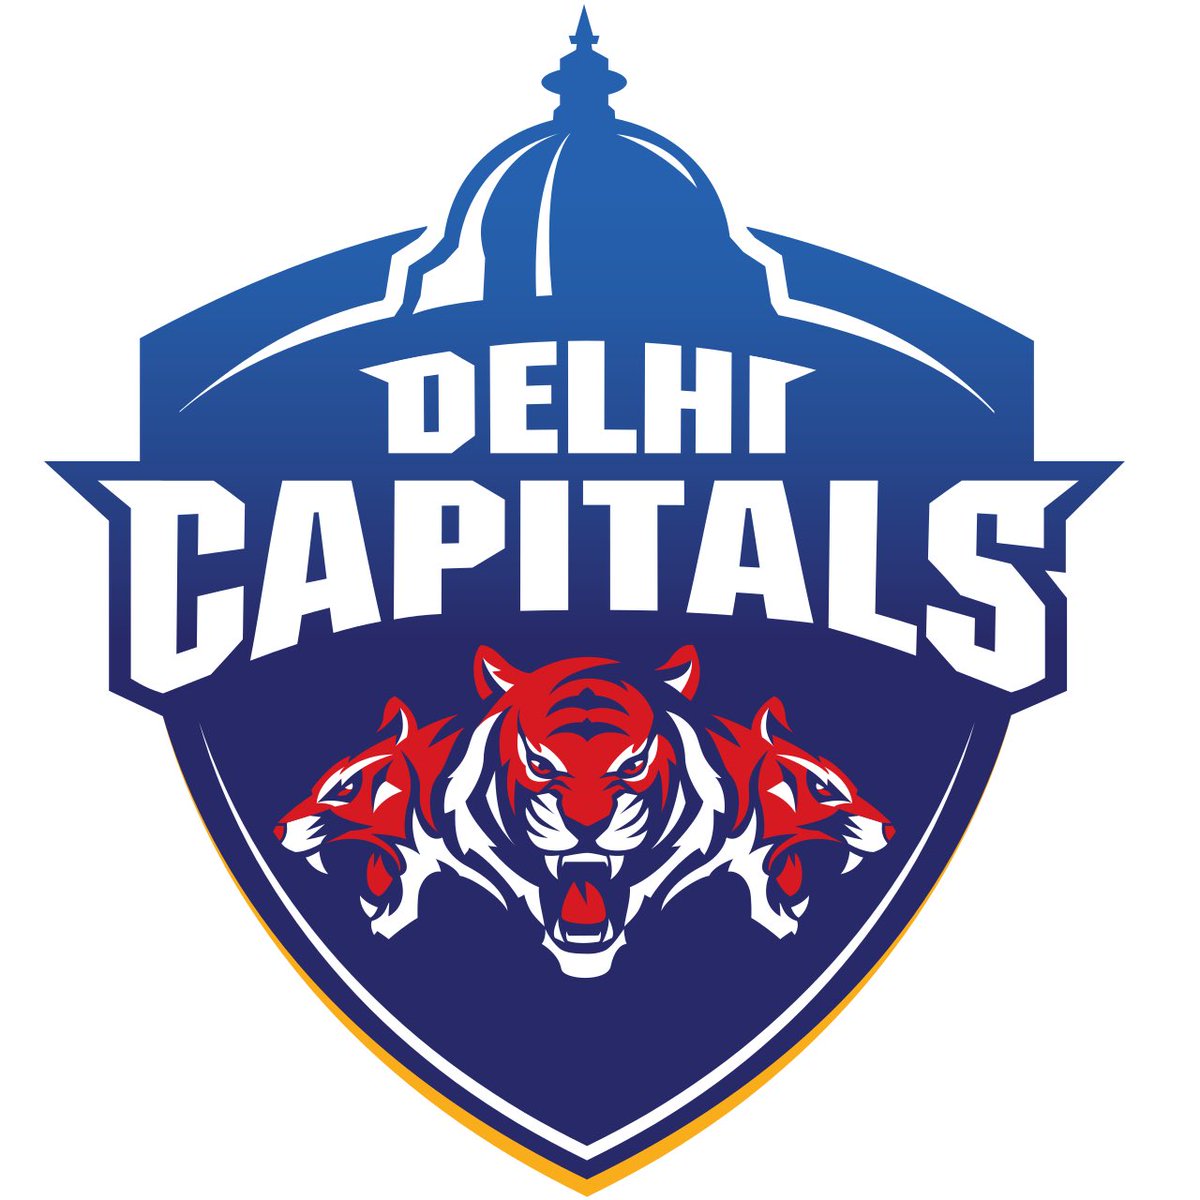 Delhi Capitals  TottenhamHaven’t had the truest success yet, but have the coach and players that make them capable of achieving the top honours. The blend of foreign superstardom and domestic experience can produce the goods, when it matters most.